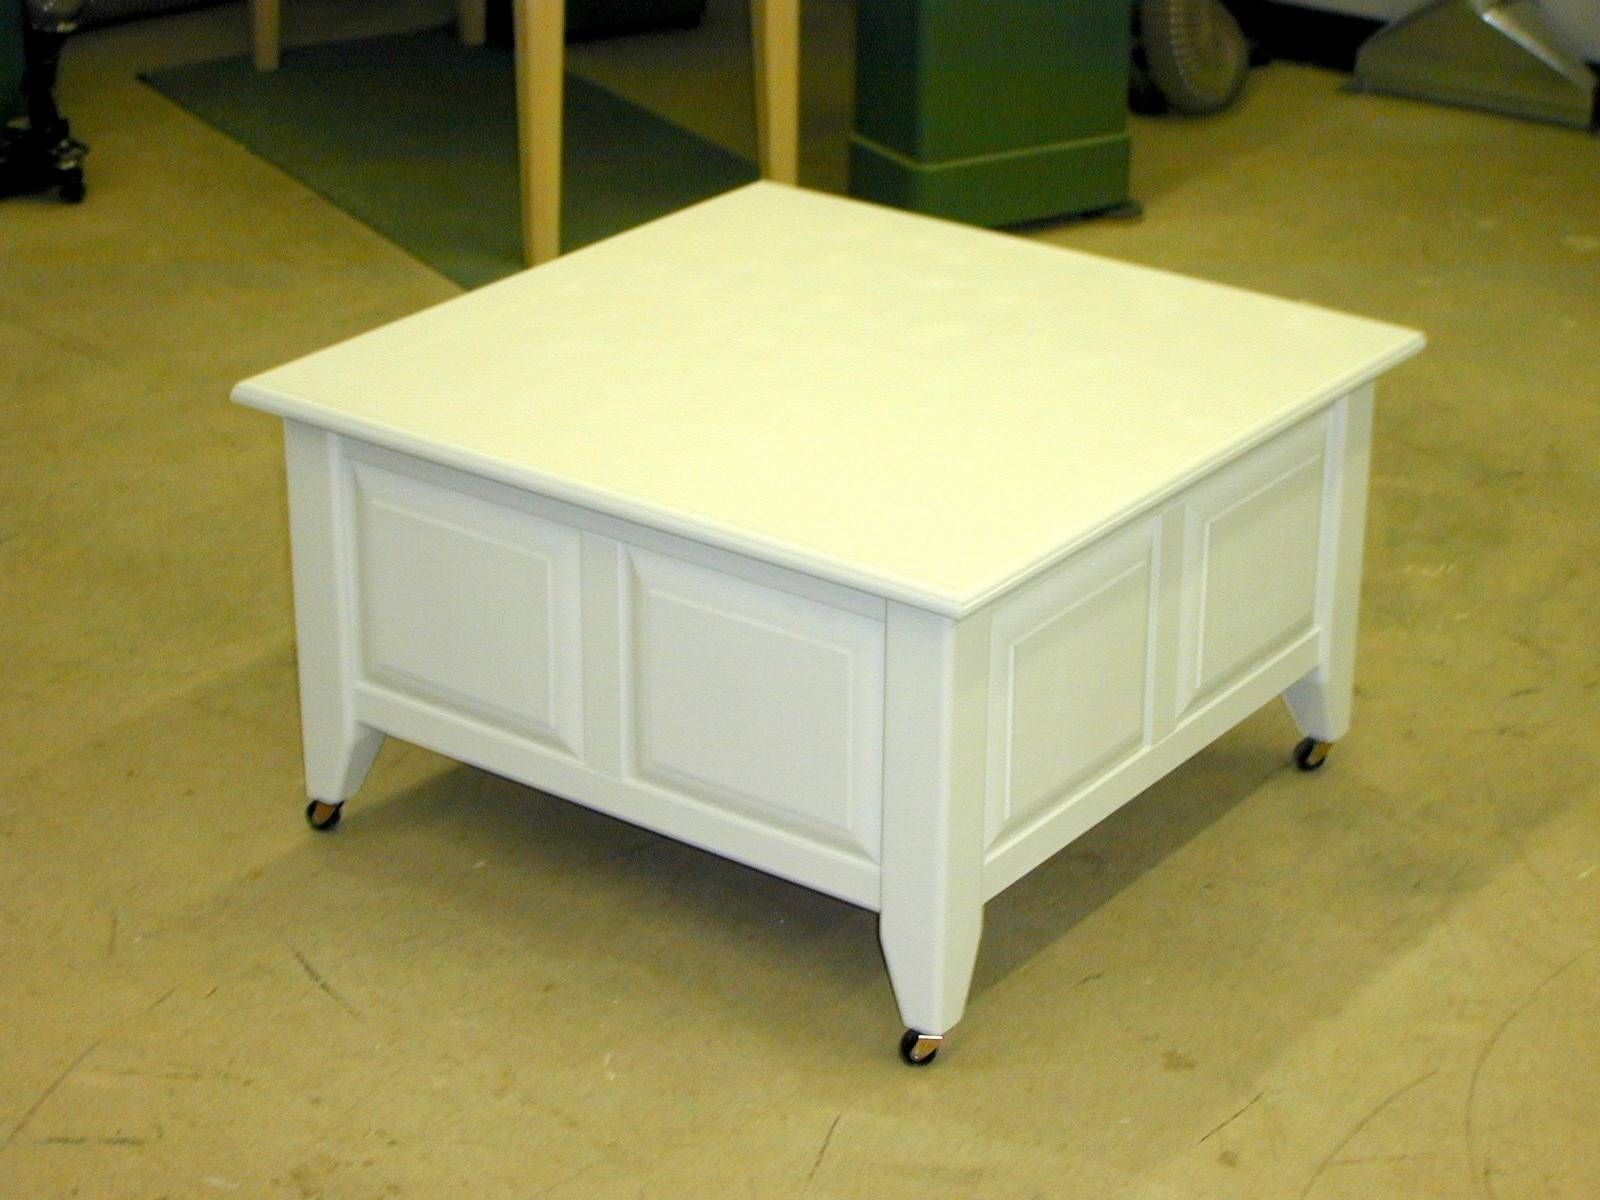 Cube White Wooden Coffee Table Plus Four Short Legs And Small Intended For Short Legs Coffee Tables (View 23 of 30)